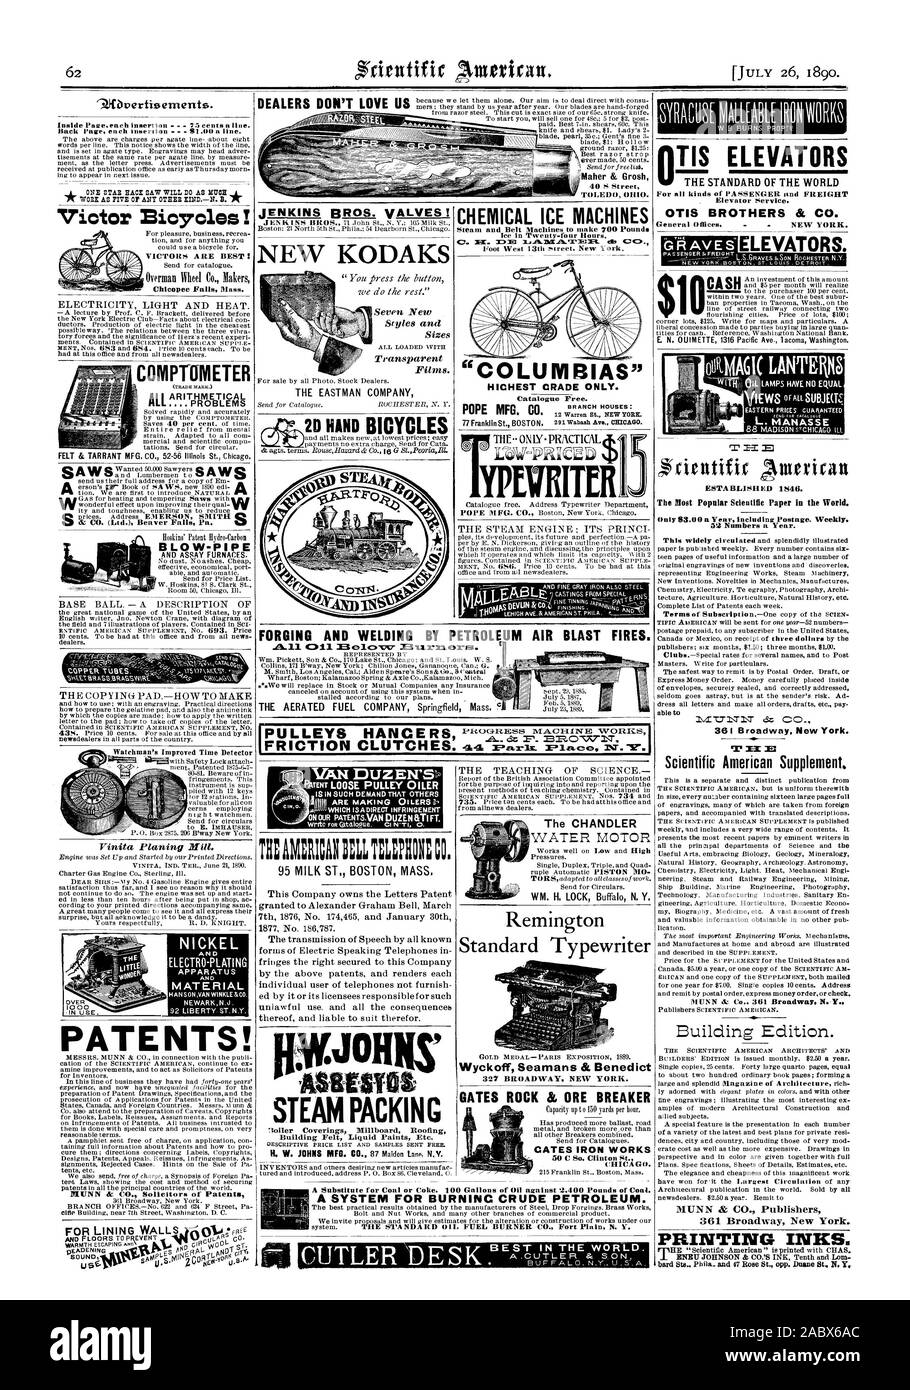 Maher & Grosh 40 S Street TOLED 00. DEALERS DON'T LOVE US 9ifb Inside Page. each insertion  :5 cents a line. Back Page each insertion  S1.00 a line. NICKEL ELECTROPLATING M AT ERIAL PATENTS! MUNN & CO. Solicitors of Patent JENKINS BROS. VALVES! NEW KODAKS 'CO LU RI BIAS The CHANDLER Standard Typewriter Wyckoff Seamans & Benedict 327 BROADWAY NEW YORK. 50 C So. Clinton St. CHICAGO. For all kinds of PASSENGER and FREIGHT Elevator Service. OTIS BROTHERS & CO. General Offices. GRAVES oilltMAG IC LANTERN ESTABLISHED 1846. The Most Popular Scientific Paper in the World. 52 Numbers a Year. Scientific Stock Photo